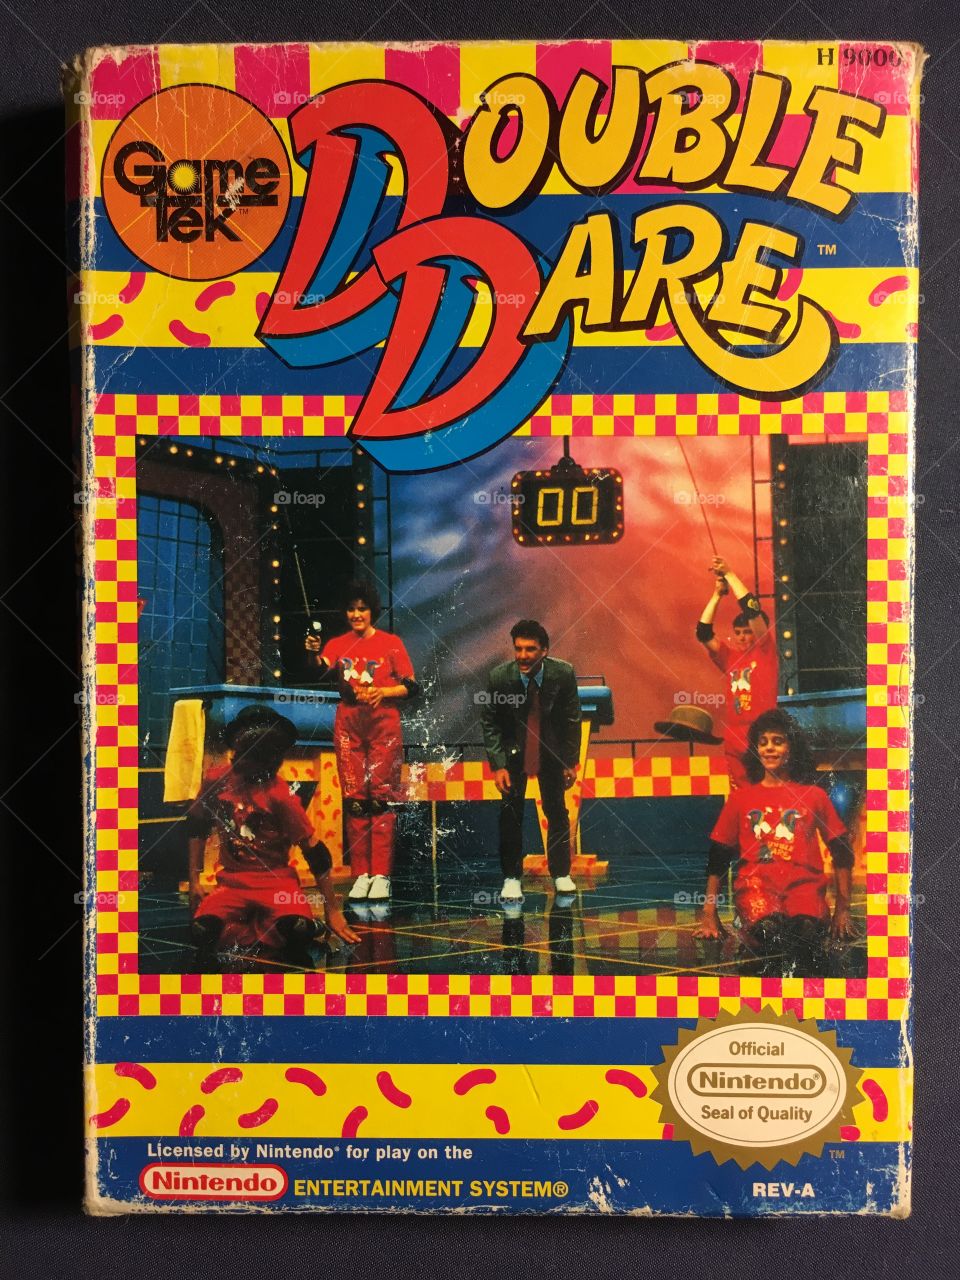 Double Dare video game box for the Nintendo NES
Released - 1990